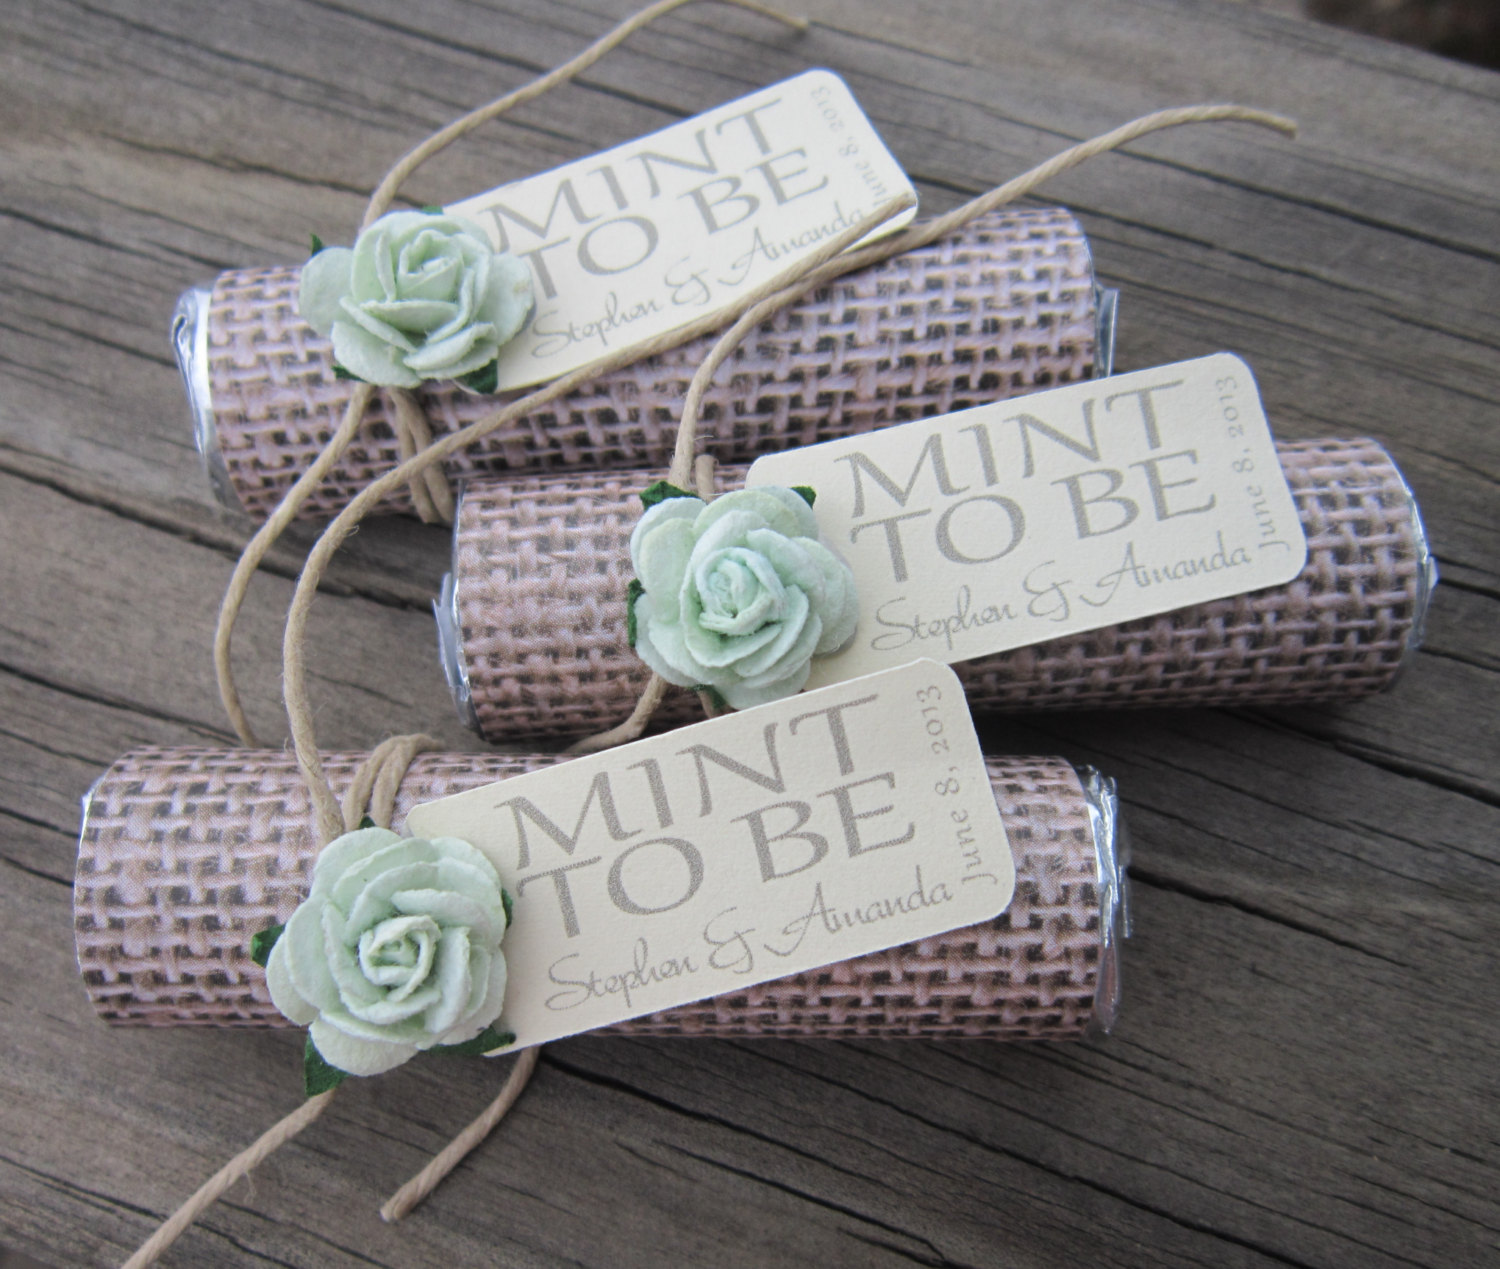 mint-to-be-wedding-favor